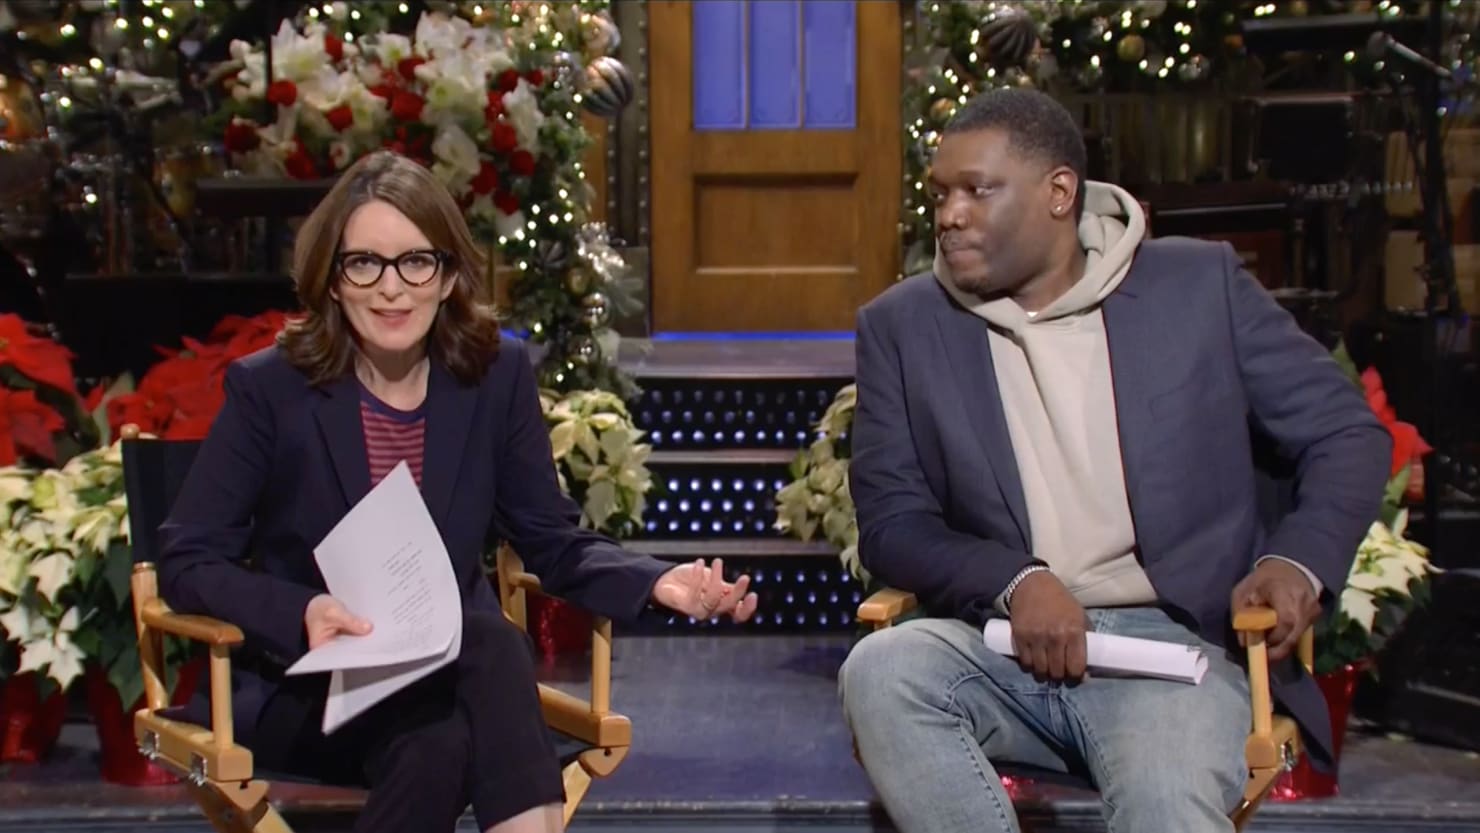 SNL Weekend Update’s Tina Fey and Michael Che Mock Elon Musk and Fox News Hosts’ Insurrection Texts – The Daily Beast